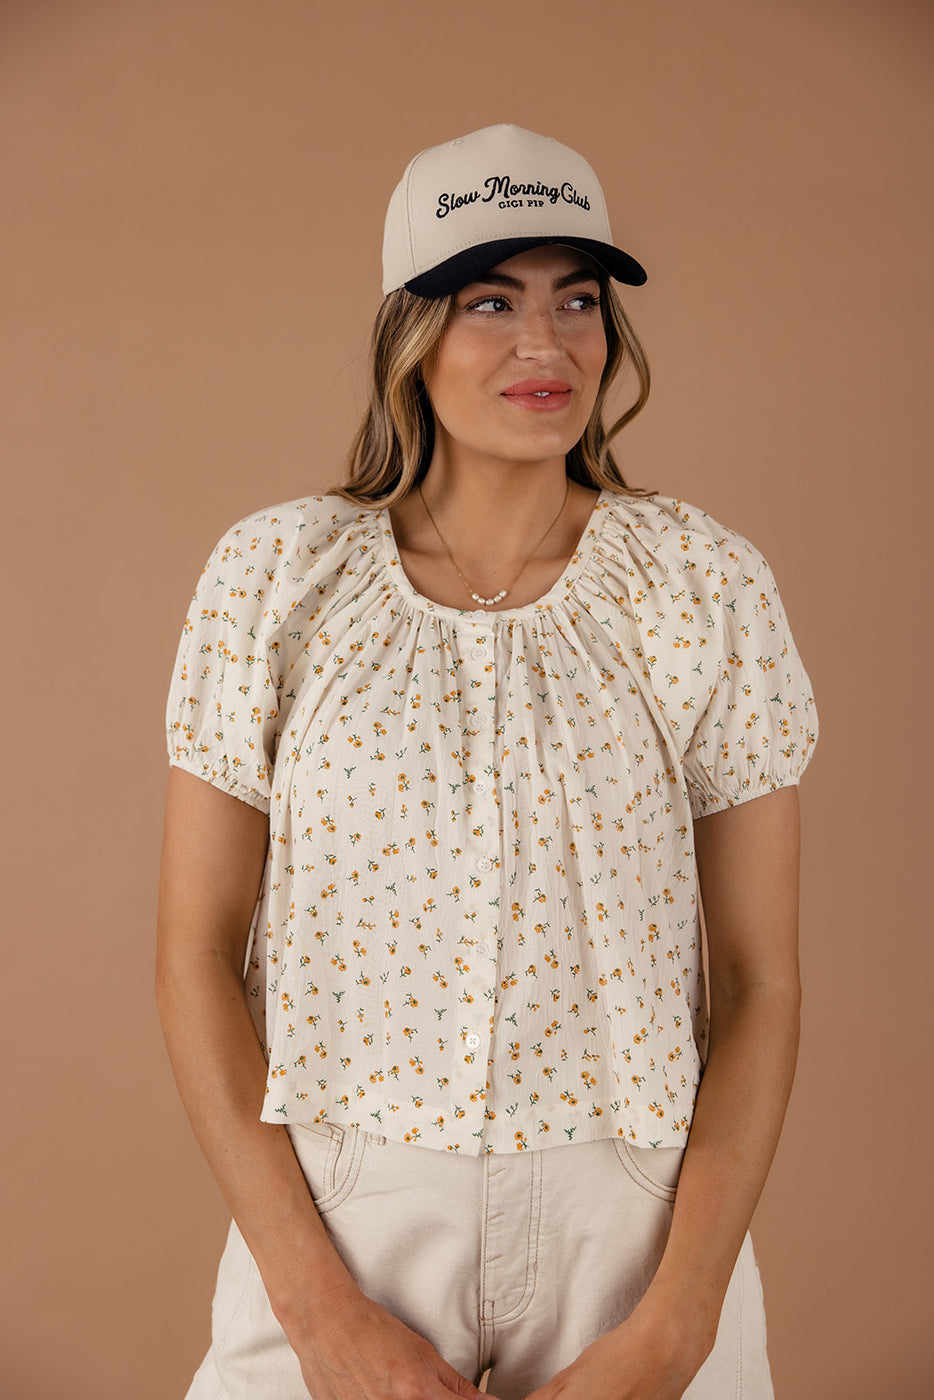 a woman wearing a hat and a blouse